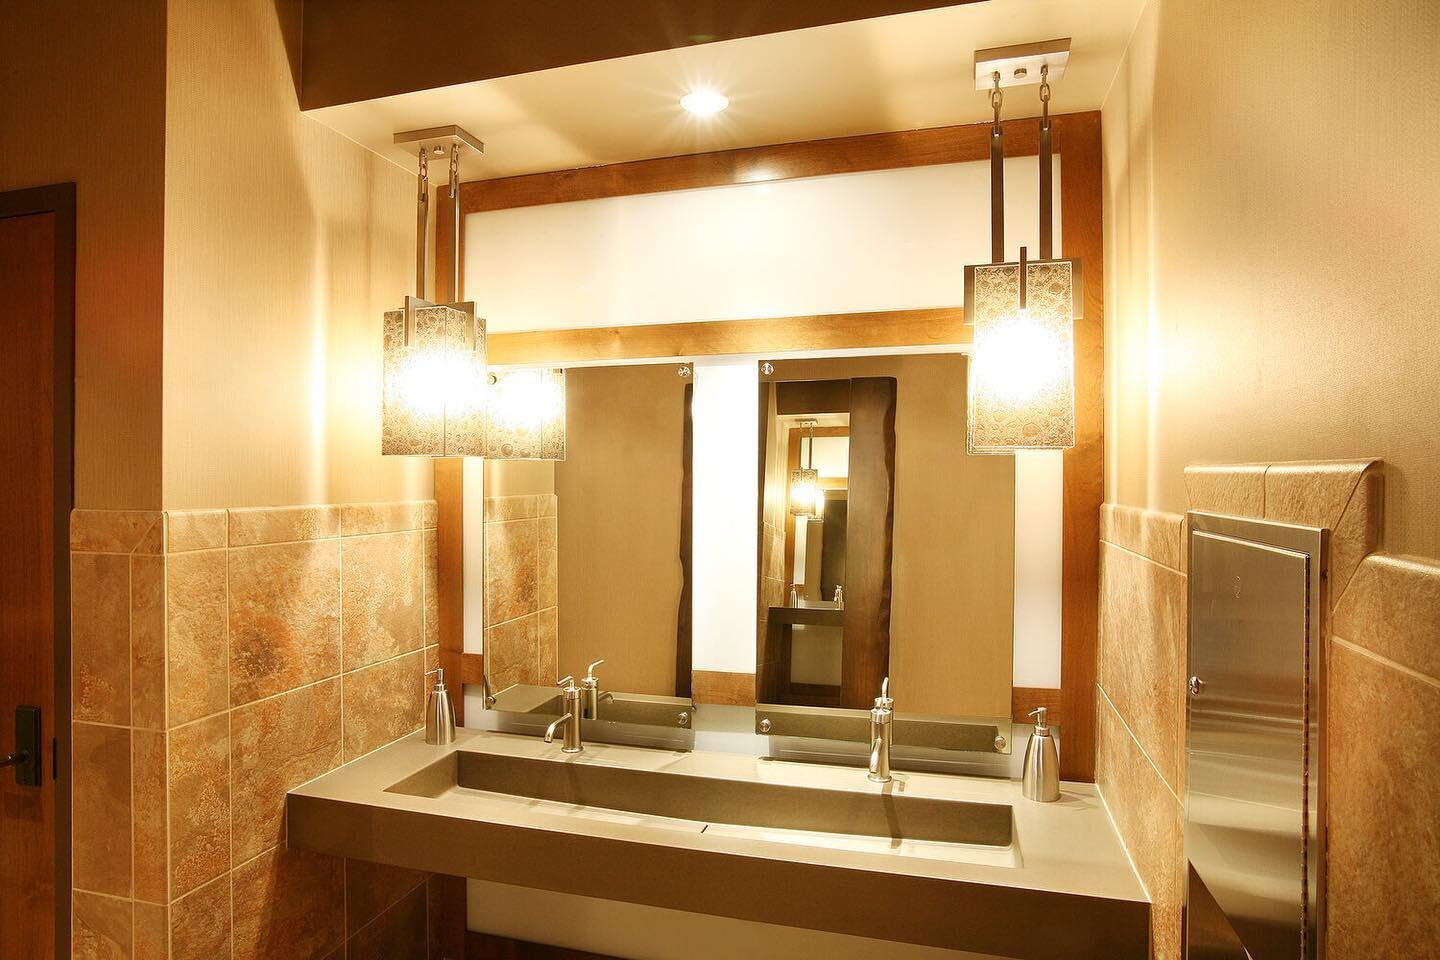 Bathrooms should always look nice, even if it isn&rsquo;t the first thing a guest sees. #coloradomountainbrewery #interiordesign #interiorarchitecture